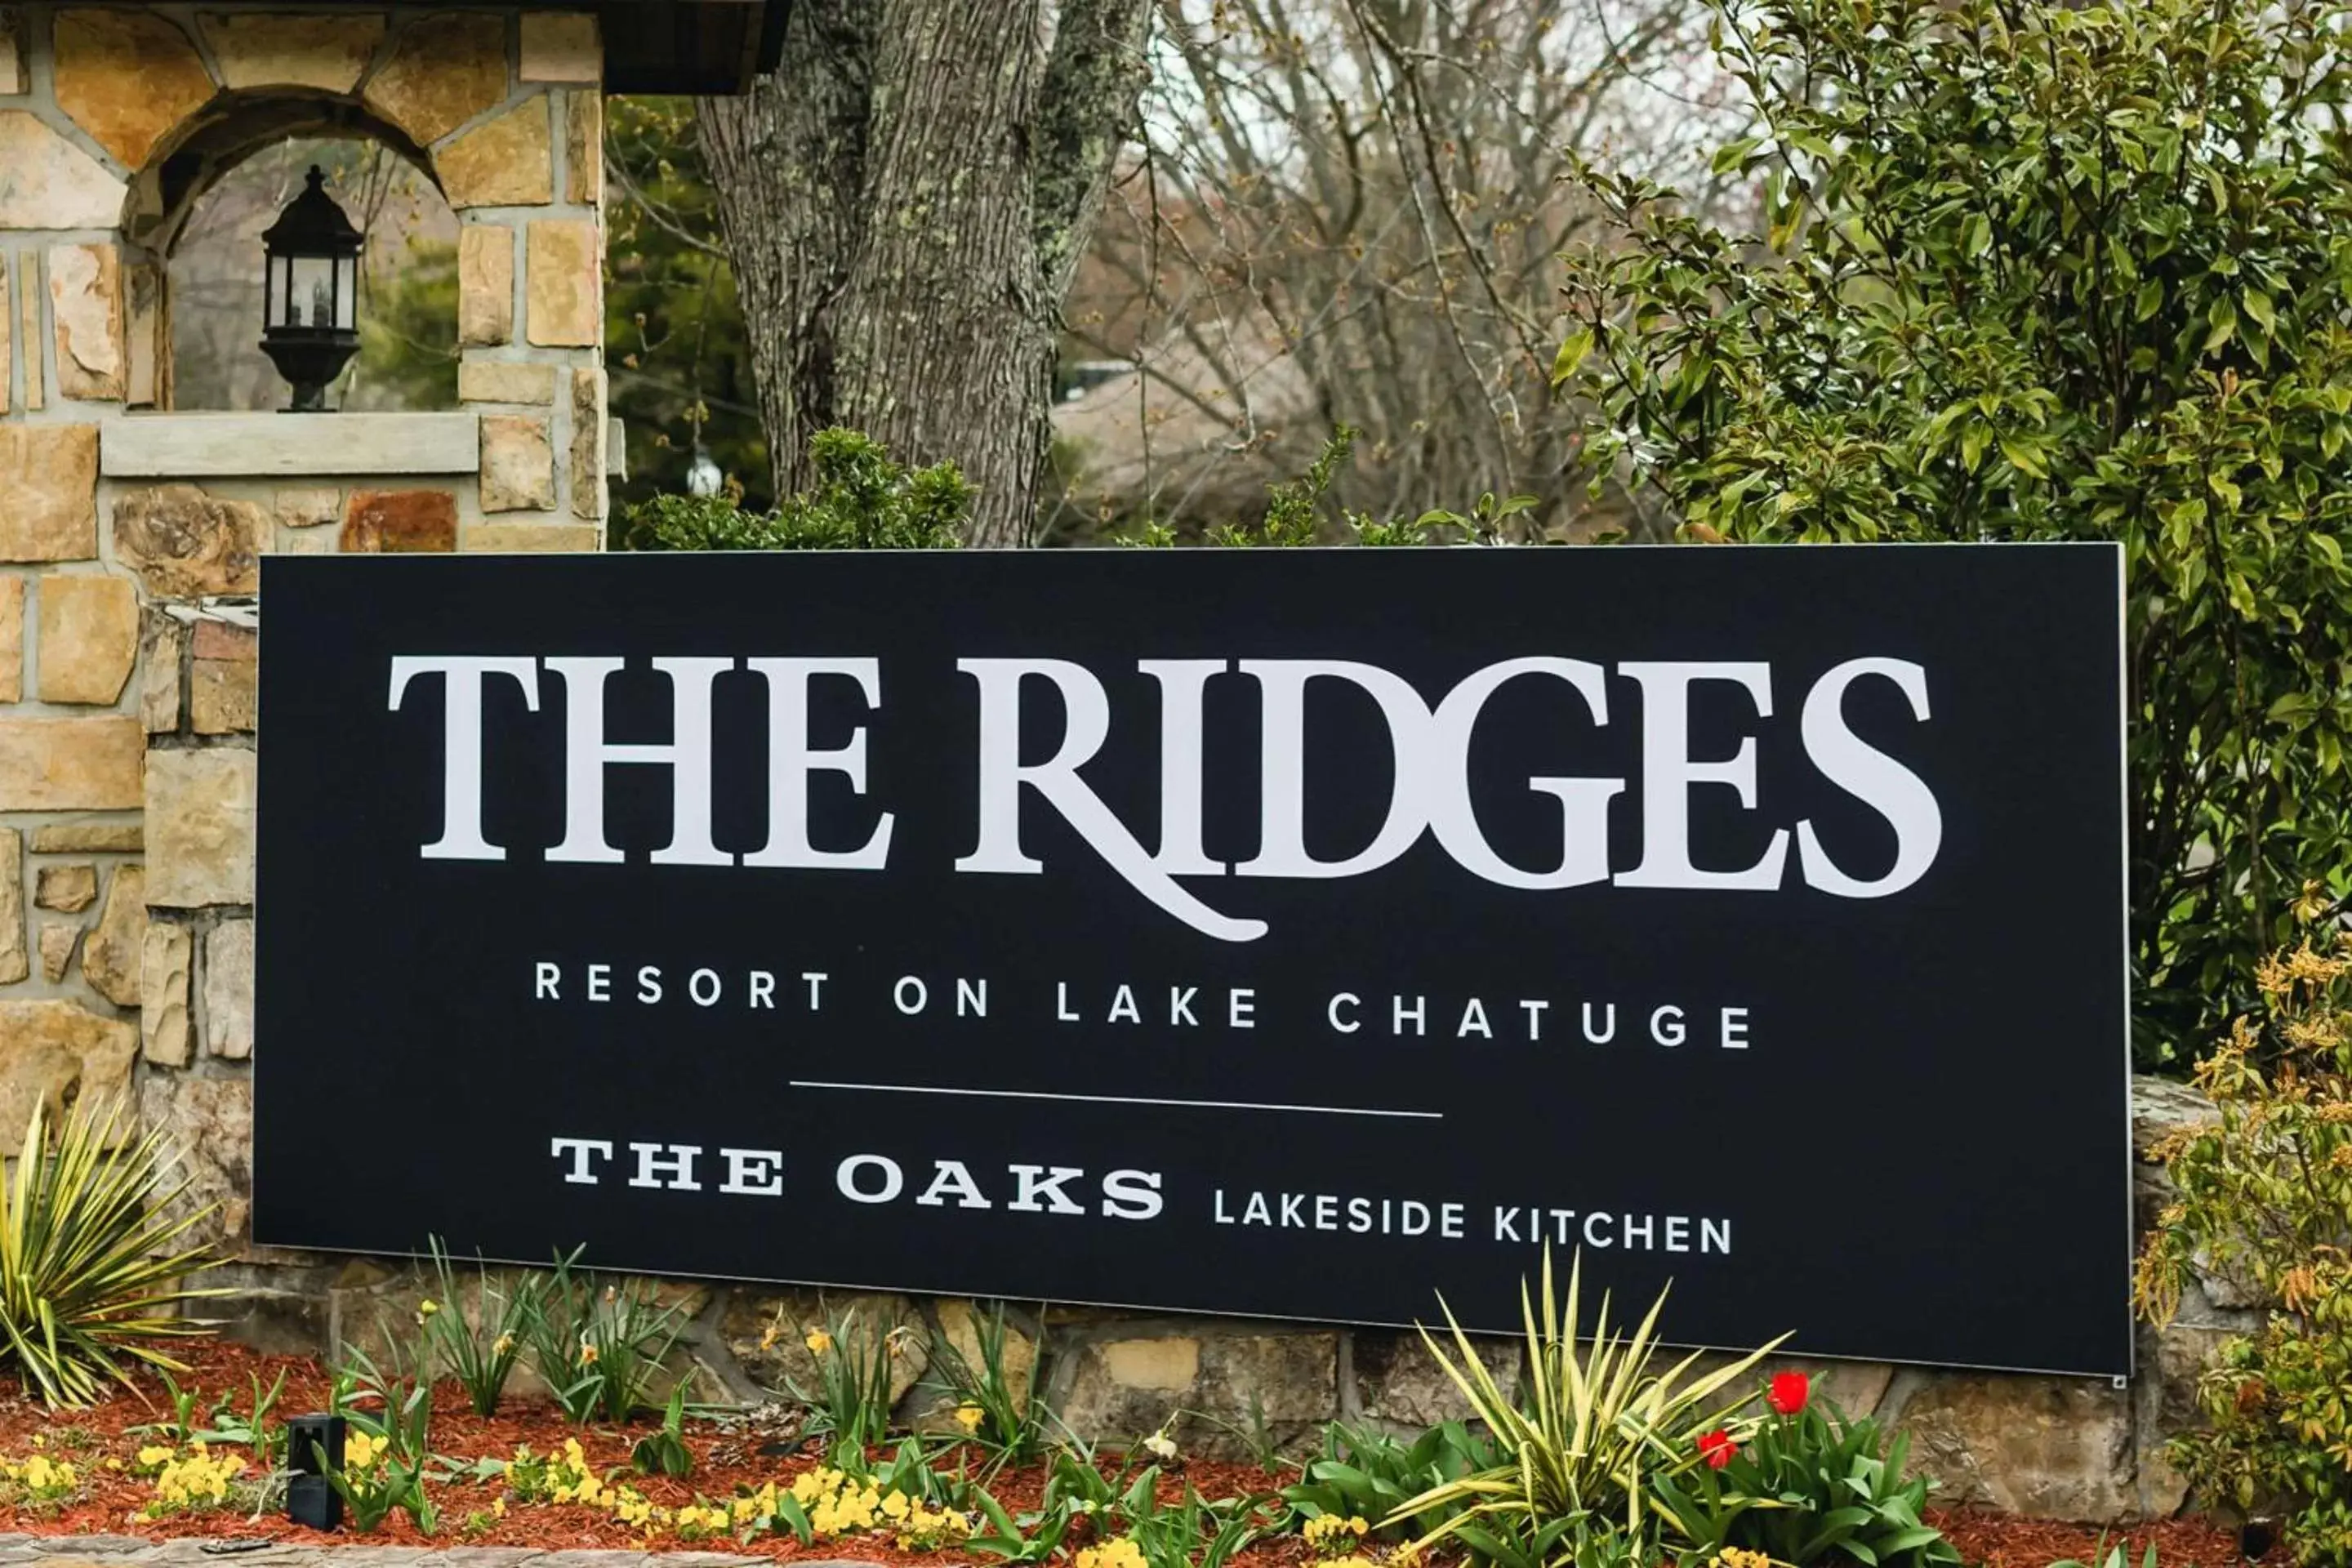 Property building in The Ridges Resort on Lake Chatuge